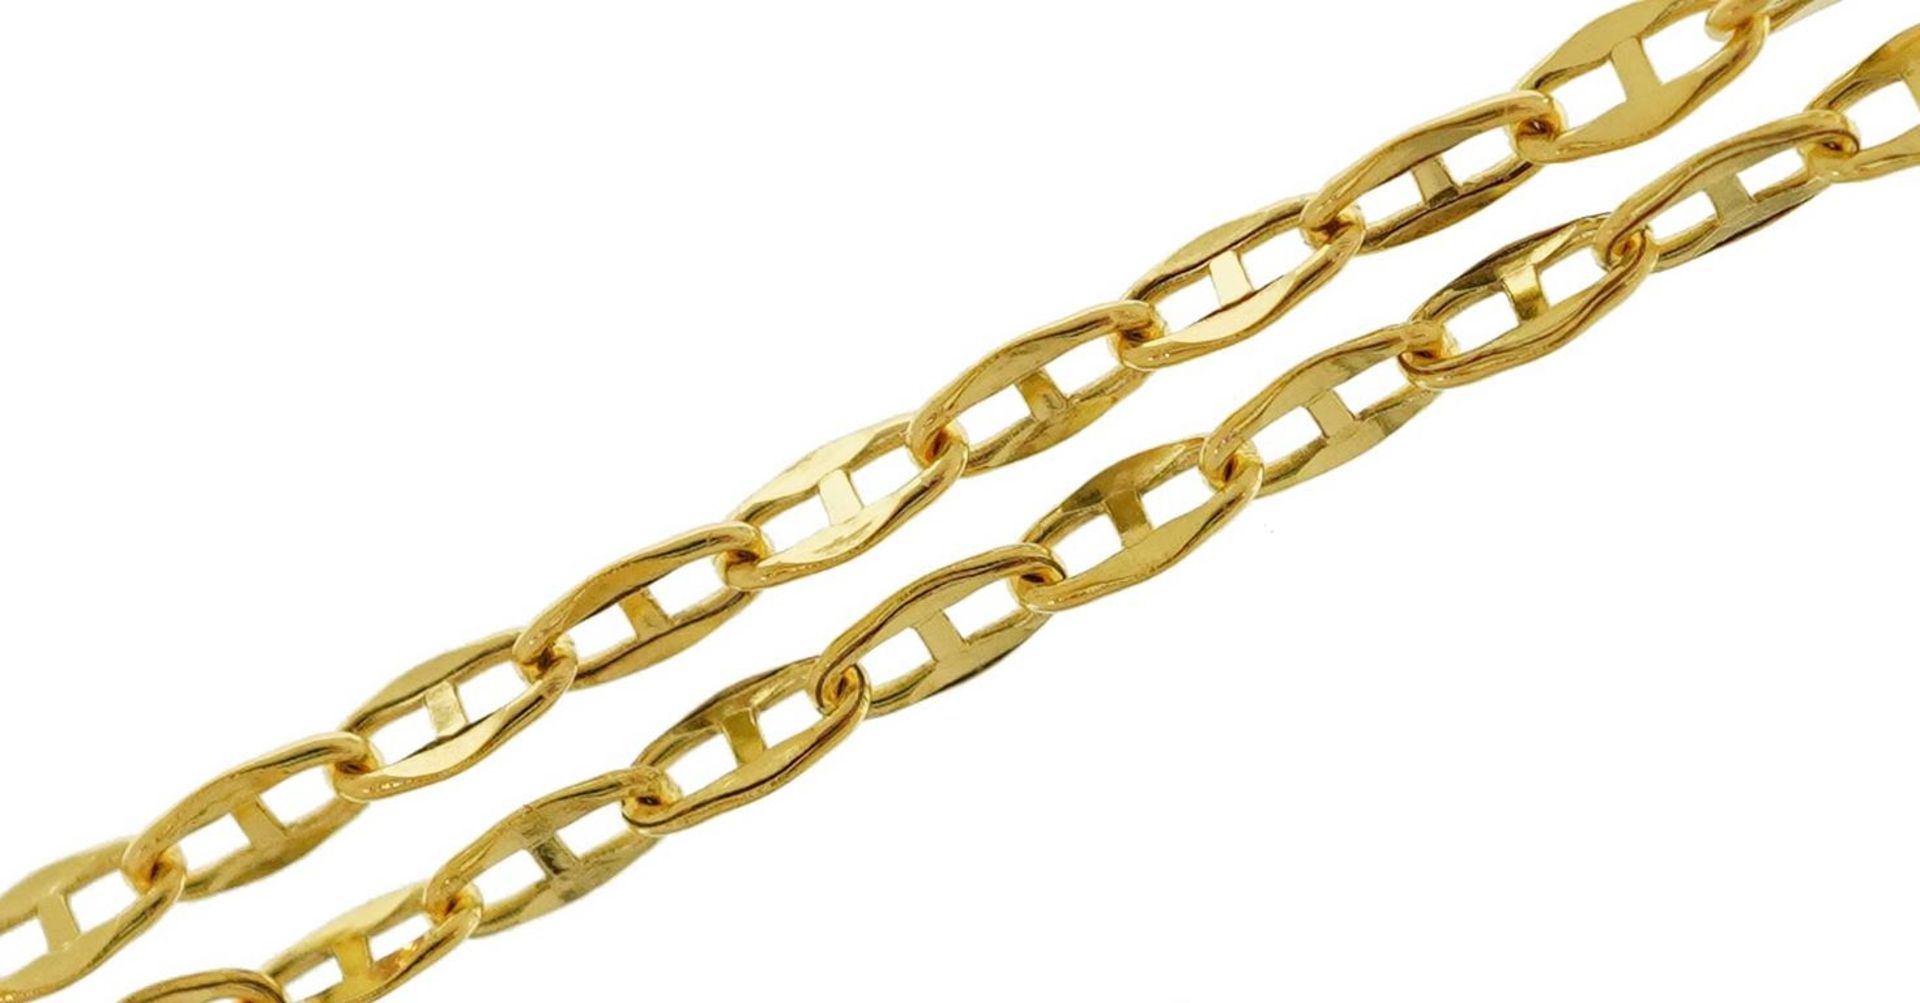 9ct gold fine gucci link necklace, 44cm in length, 0.8g